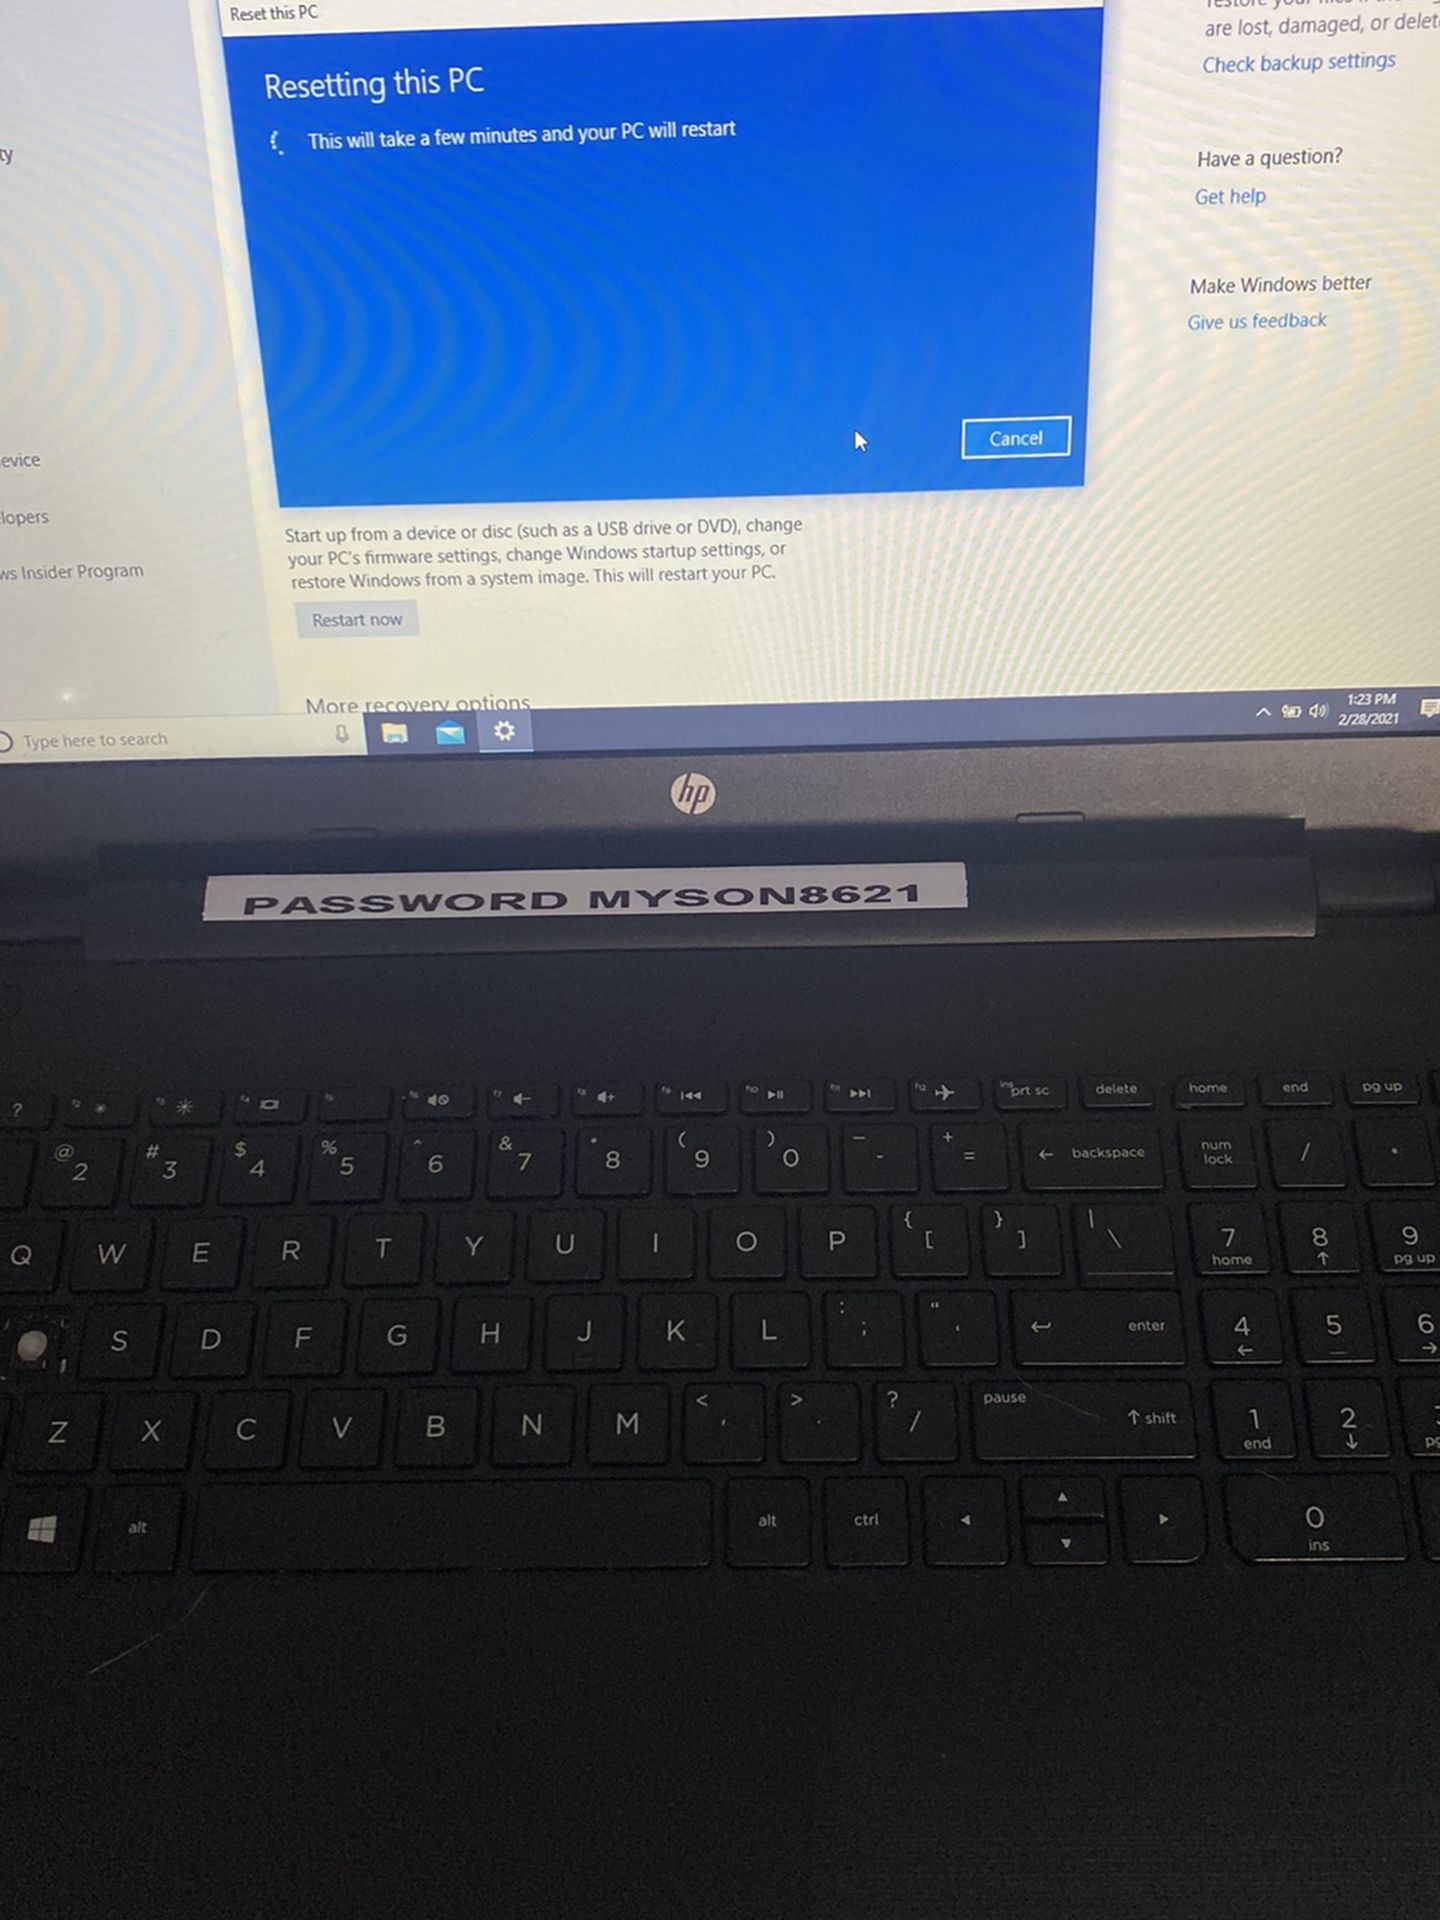 HP Laptop Works Great Just Missing The “A” Key